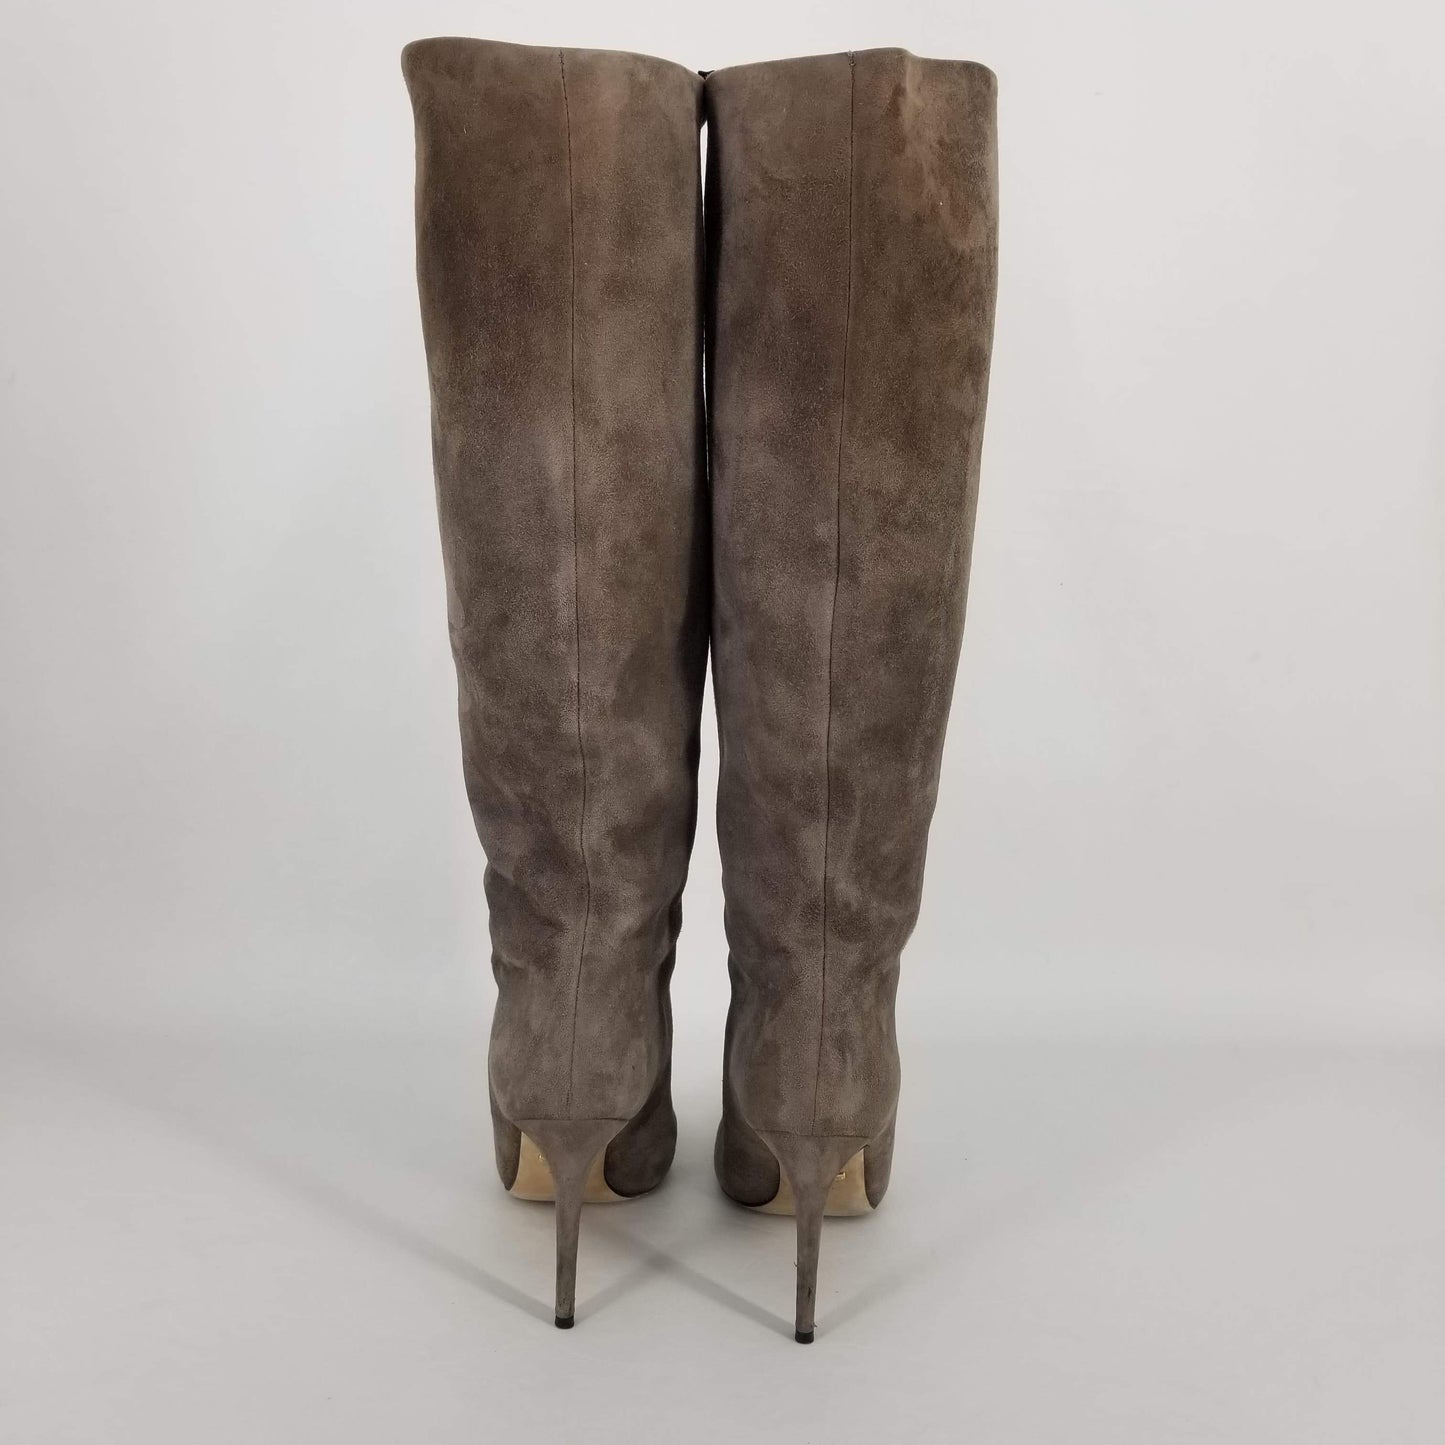 Authentic Gucci Taupe Suede Boots